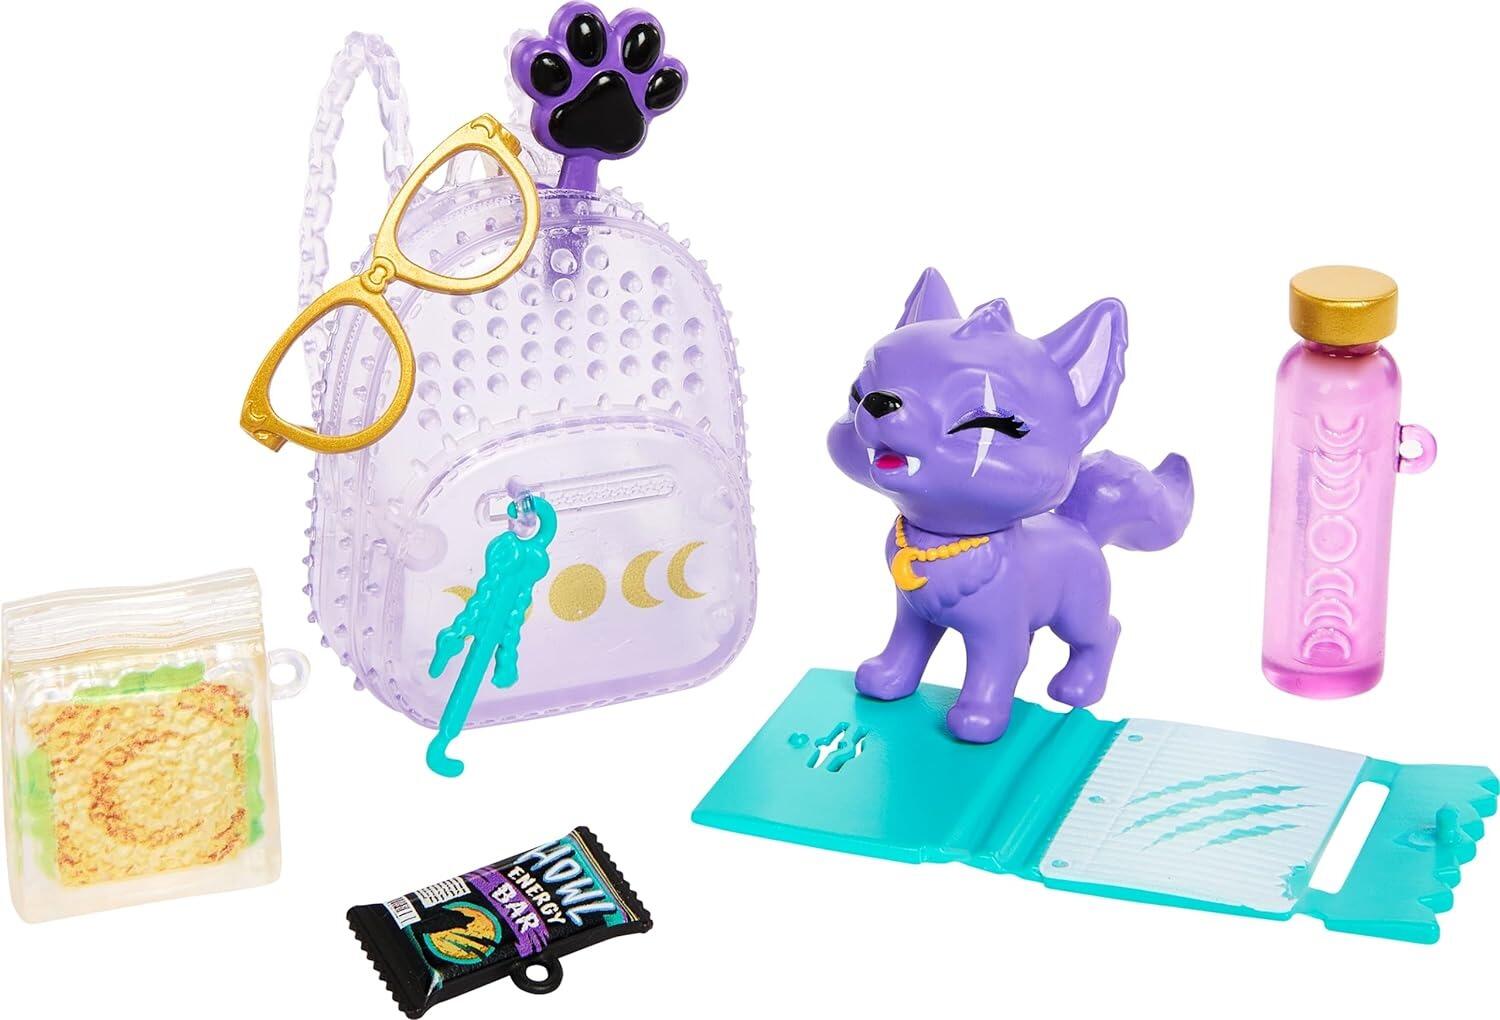 Monster High Clawdeen Wolf G3 Doll with Pet Dog Crescent and Accessories